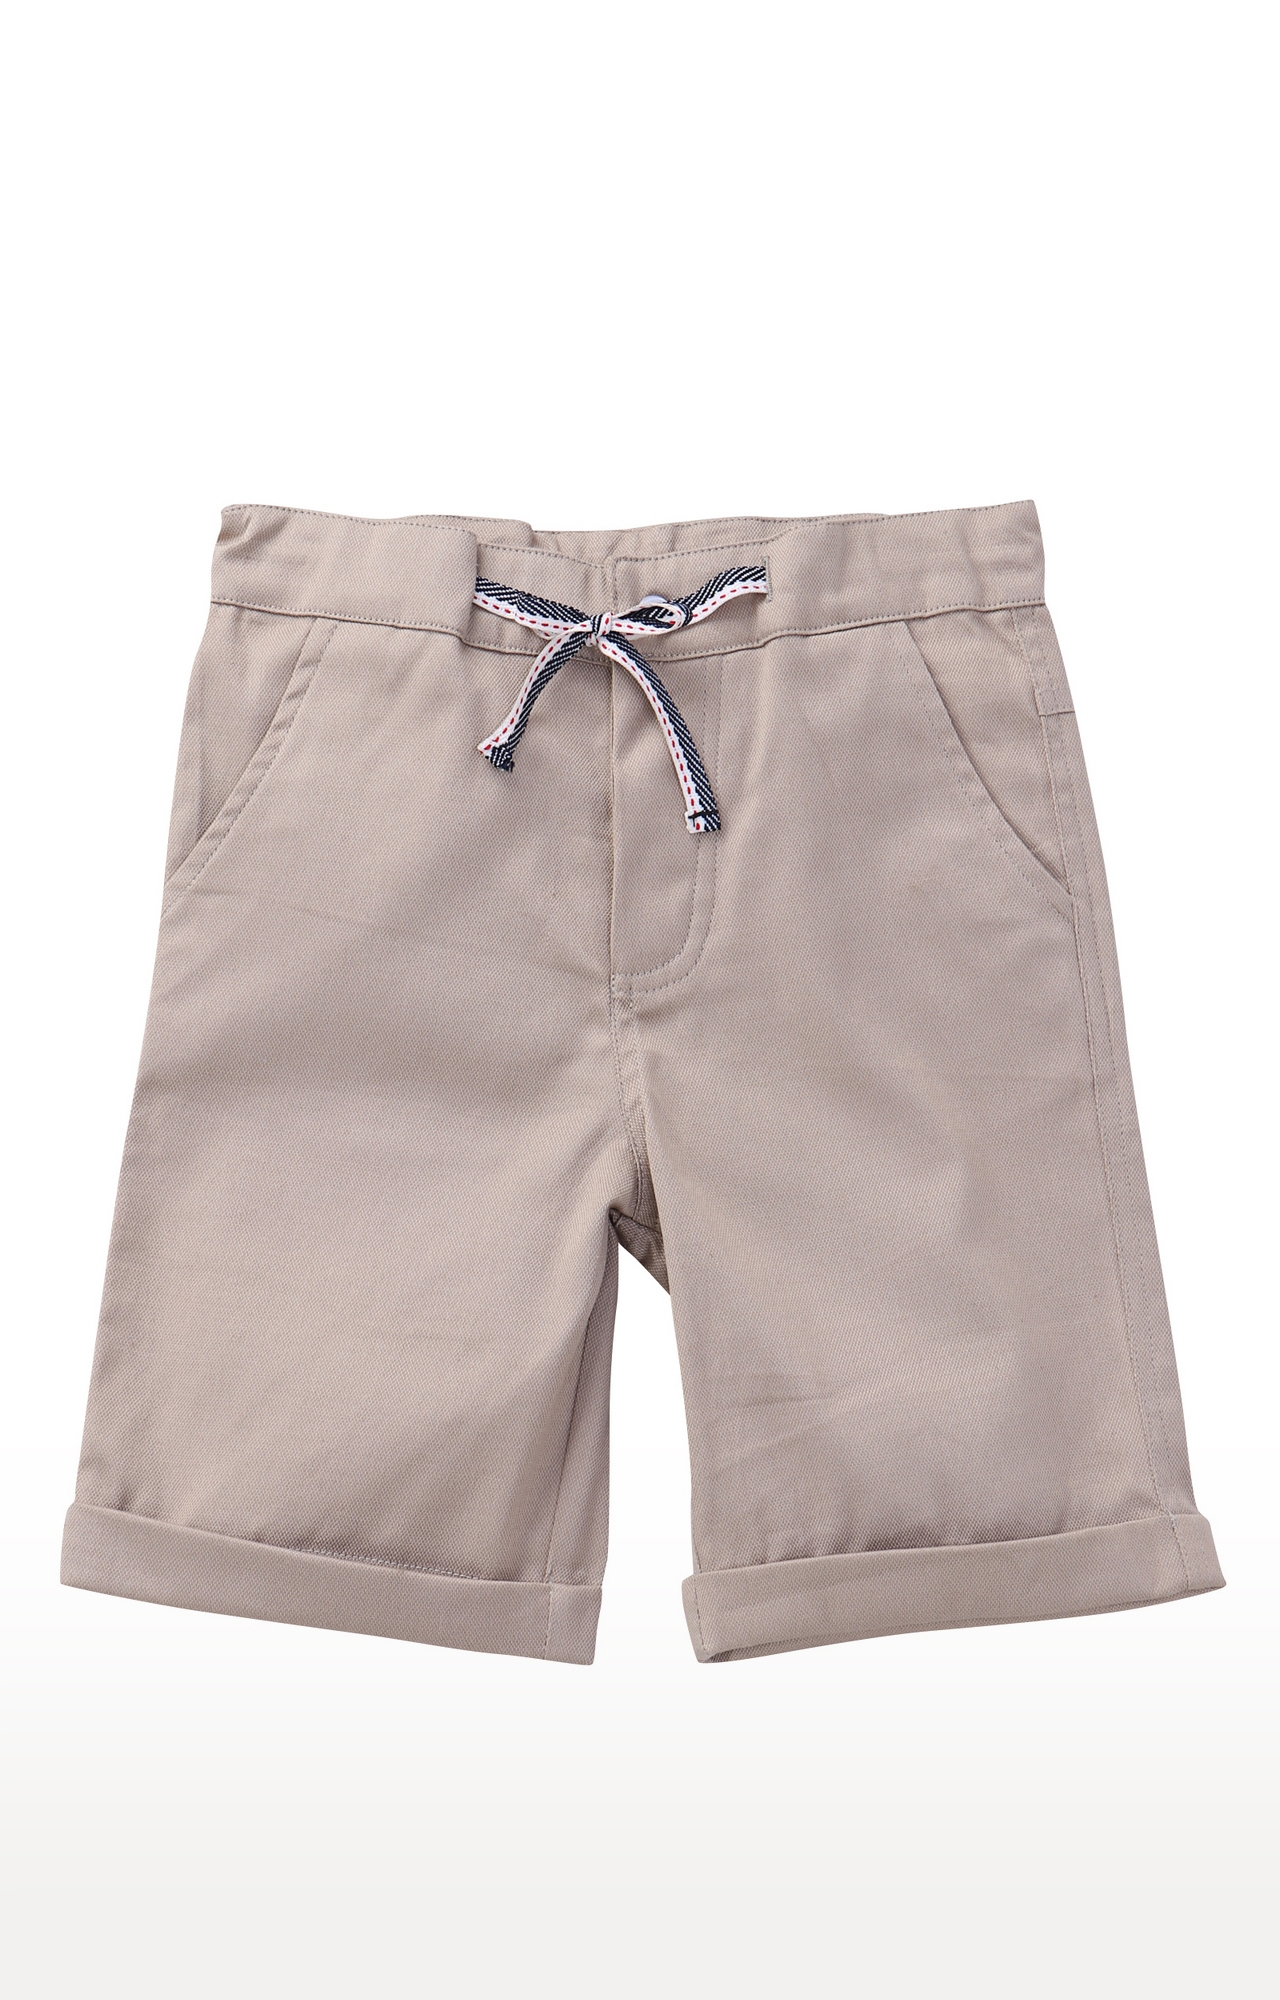 Popsicles Clothing | Popsicles Flaxen Shorts Regular Fit For Boys 0